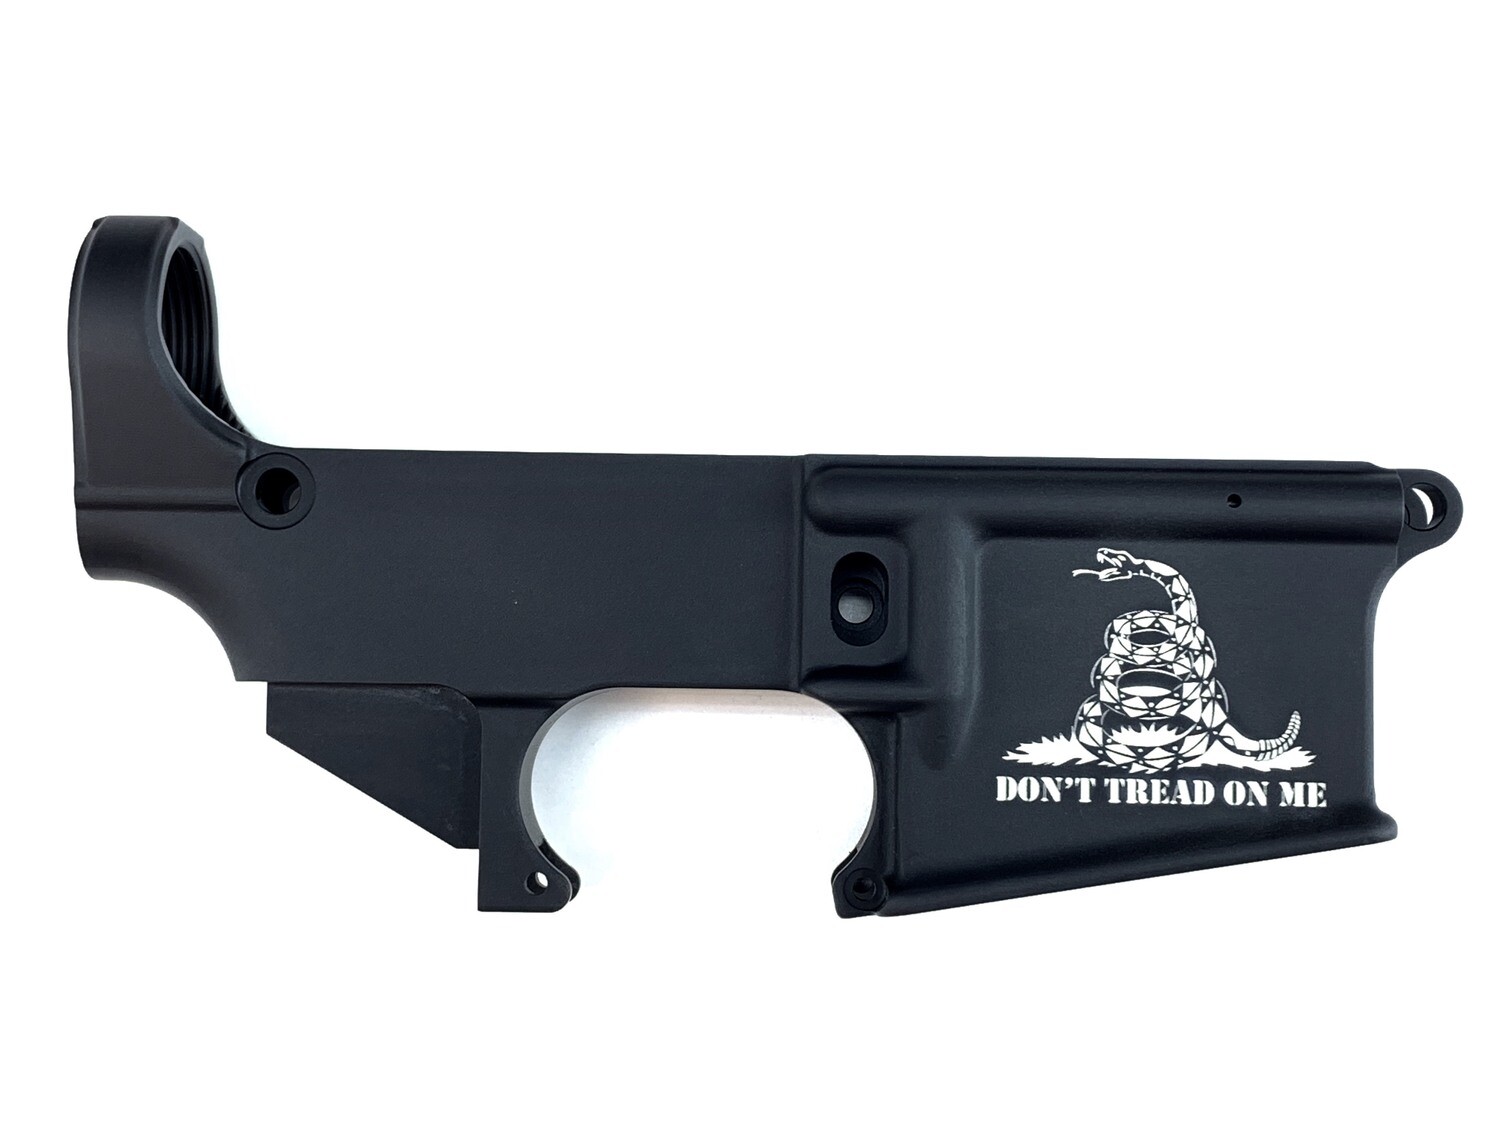 AR-15 80% Don't Tread On Me Lower Receiver - Black Anodized Forged 5.56/.223